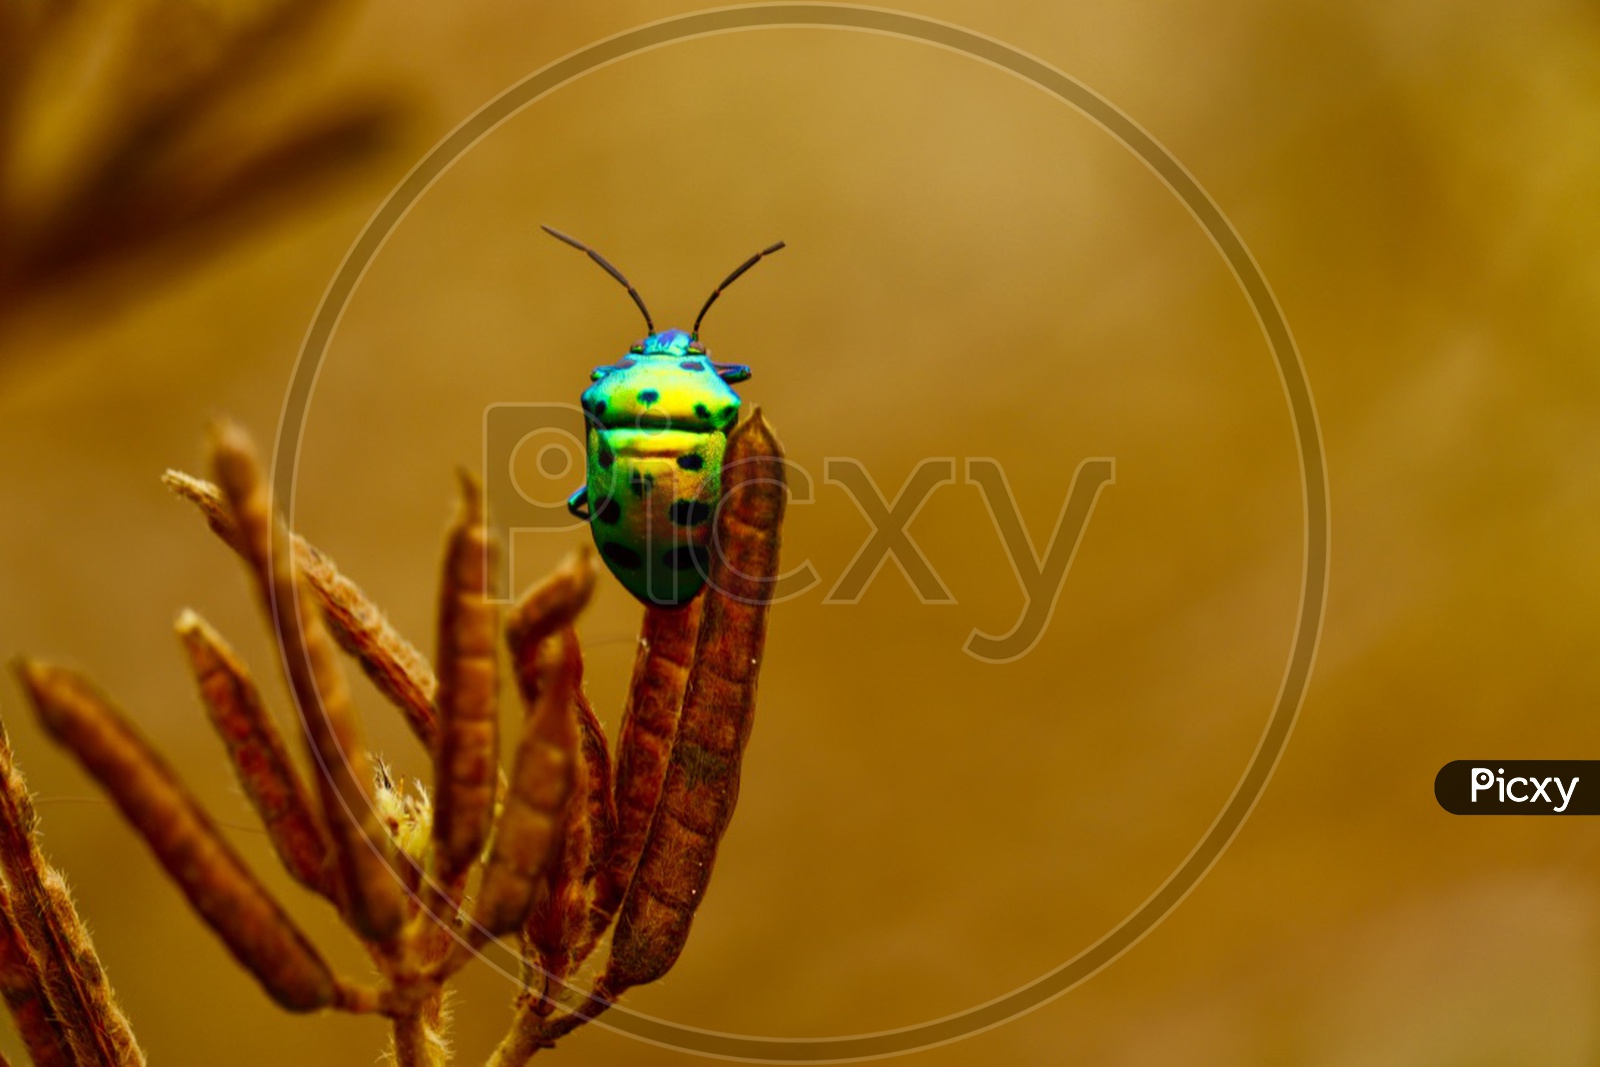 Beauty of the insect is when its shot in macro!